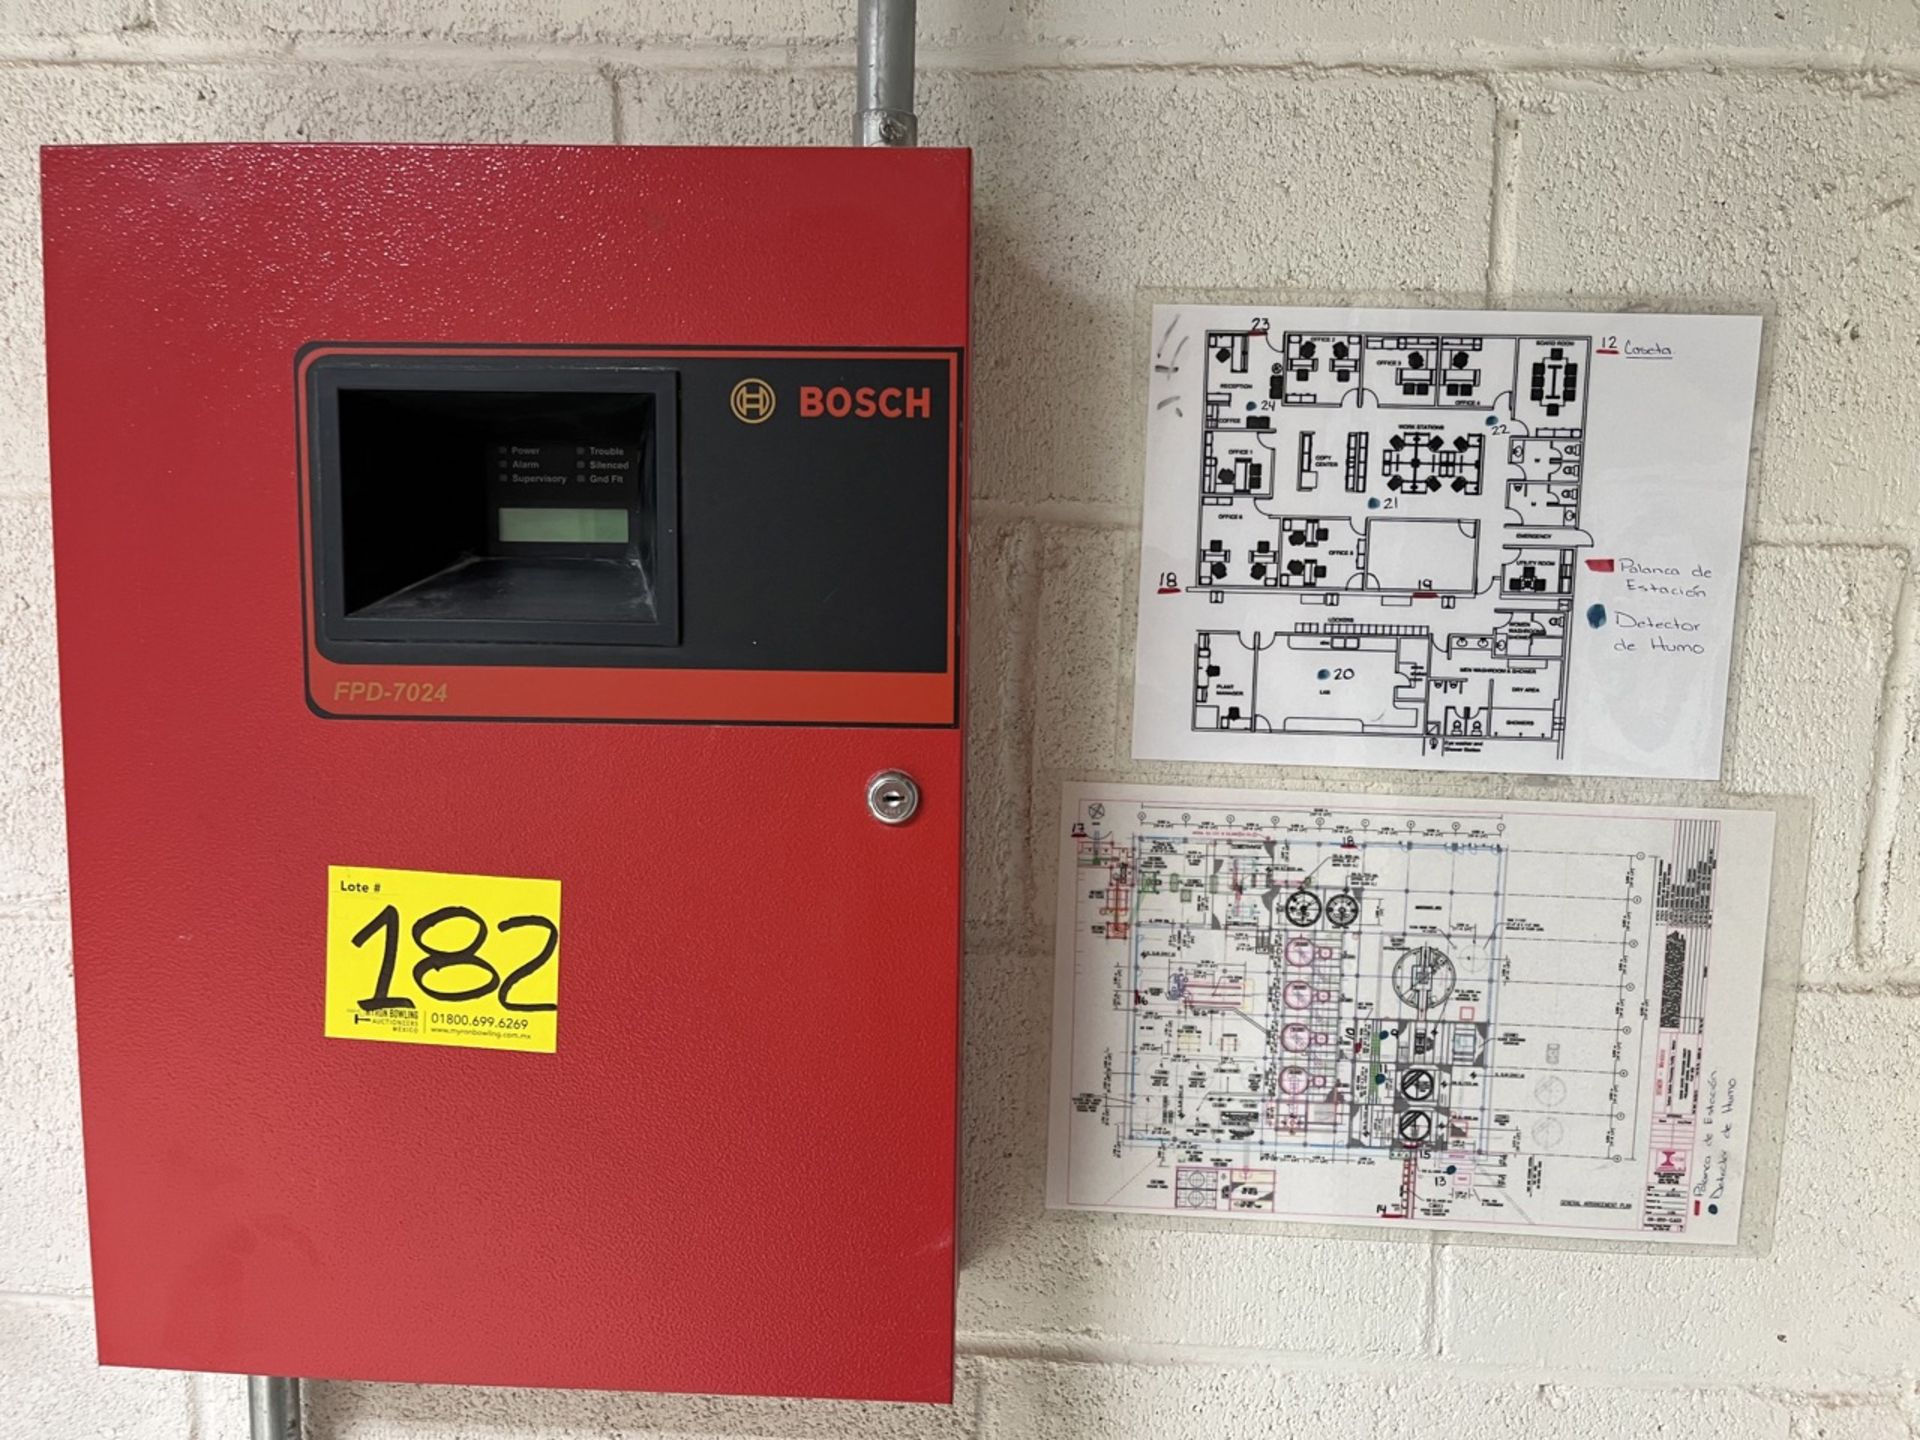 Bosh Fire alarm system of approximately 10 station levers, includes conduit piping system and smoke